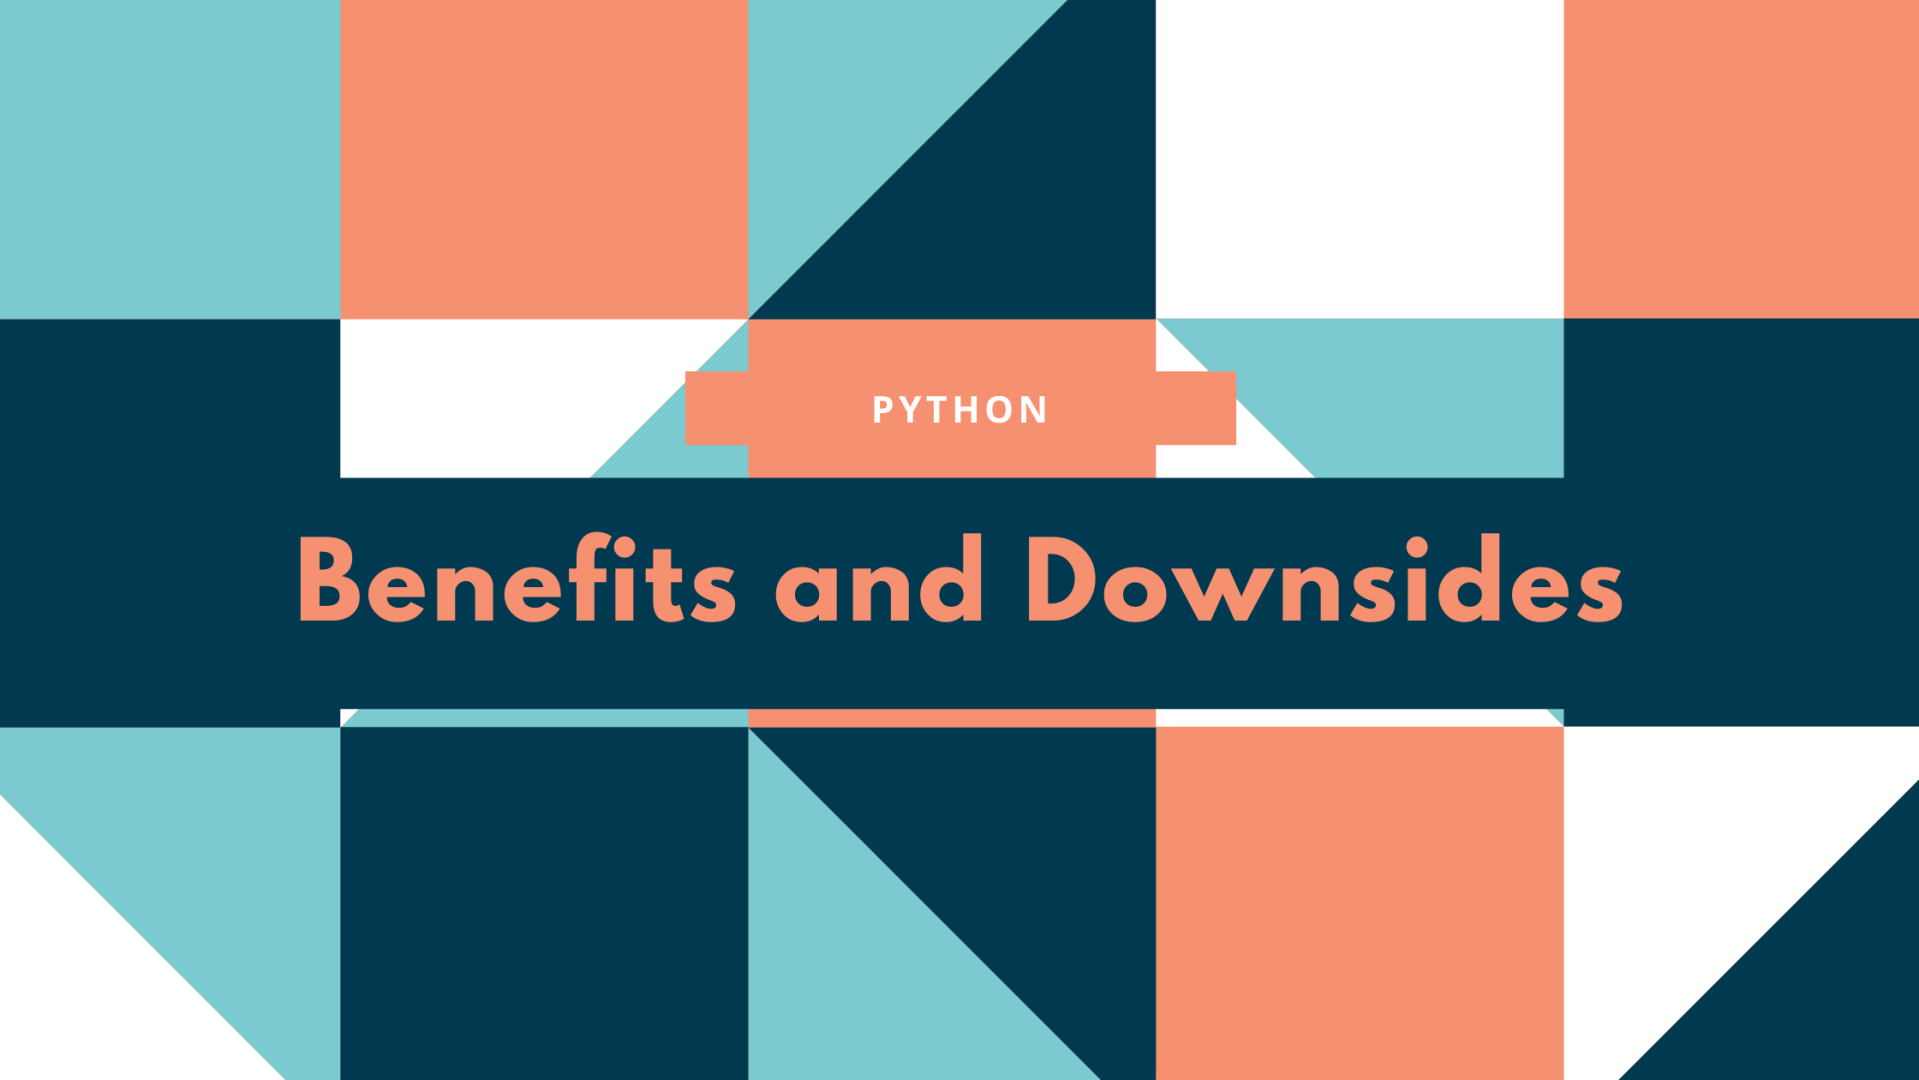 Python: What are The Benefits and Downsides of the Programming Language?